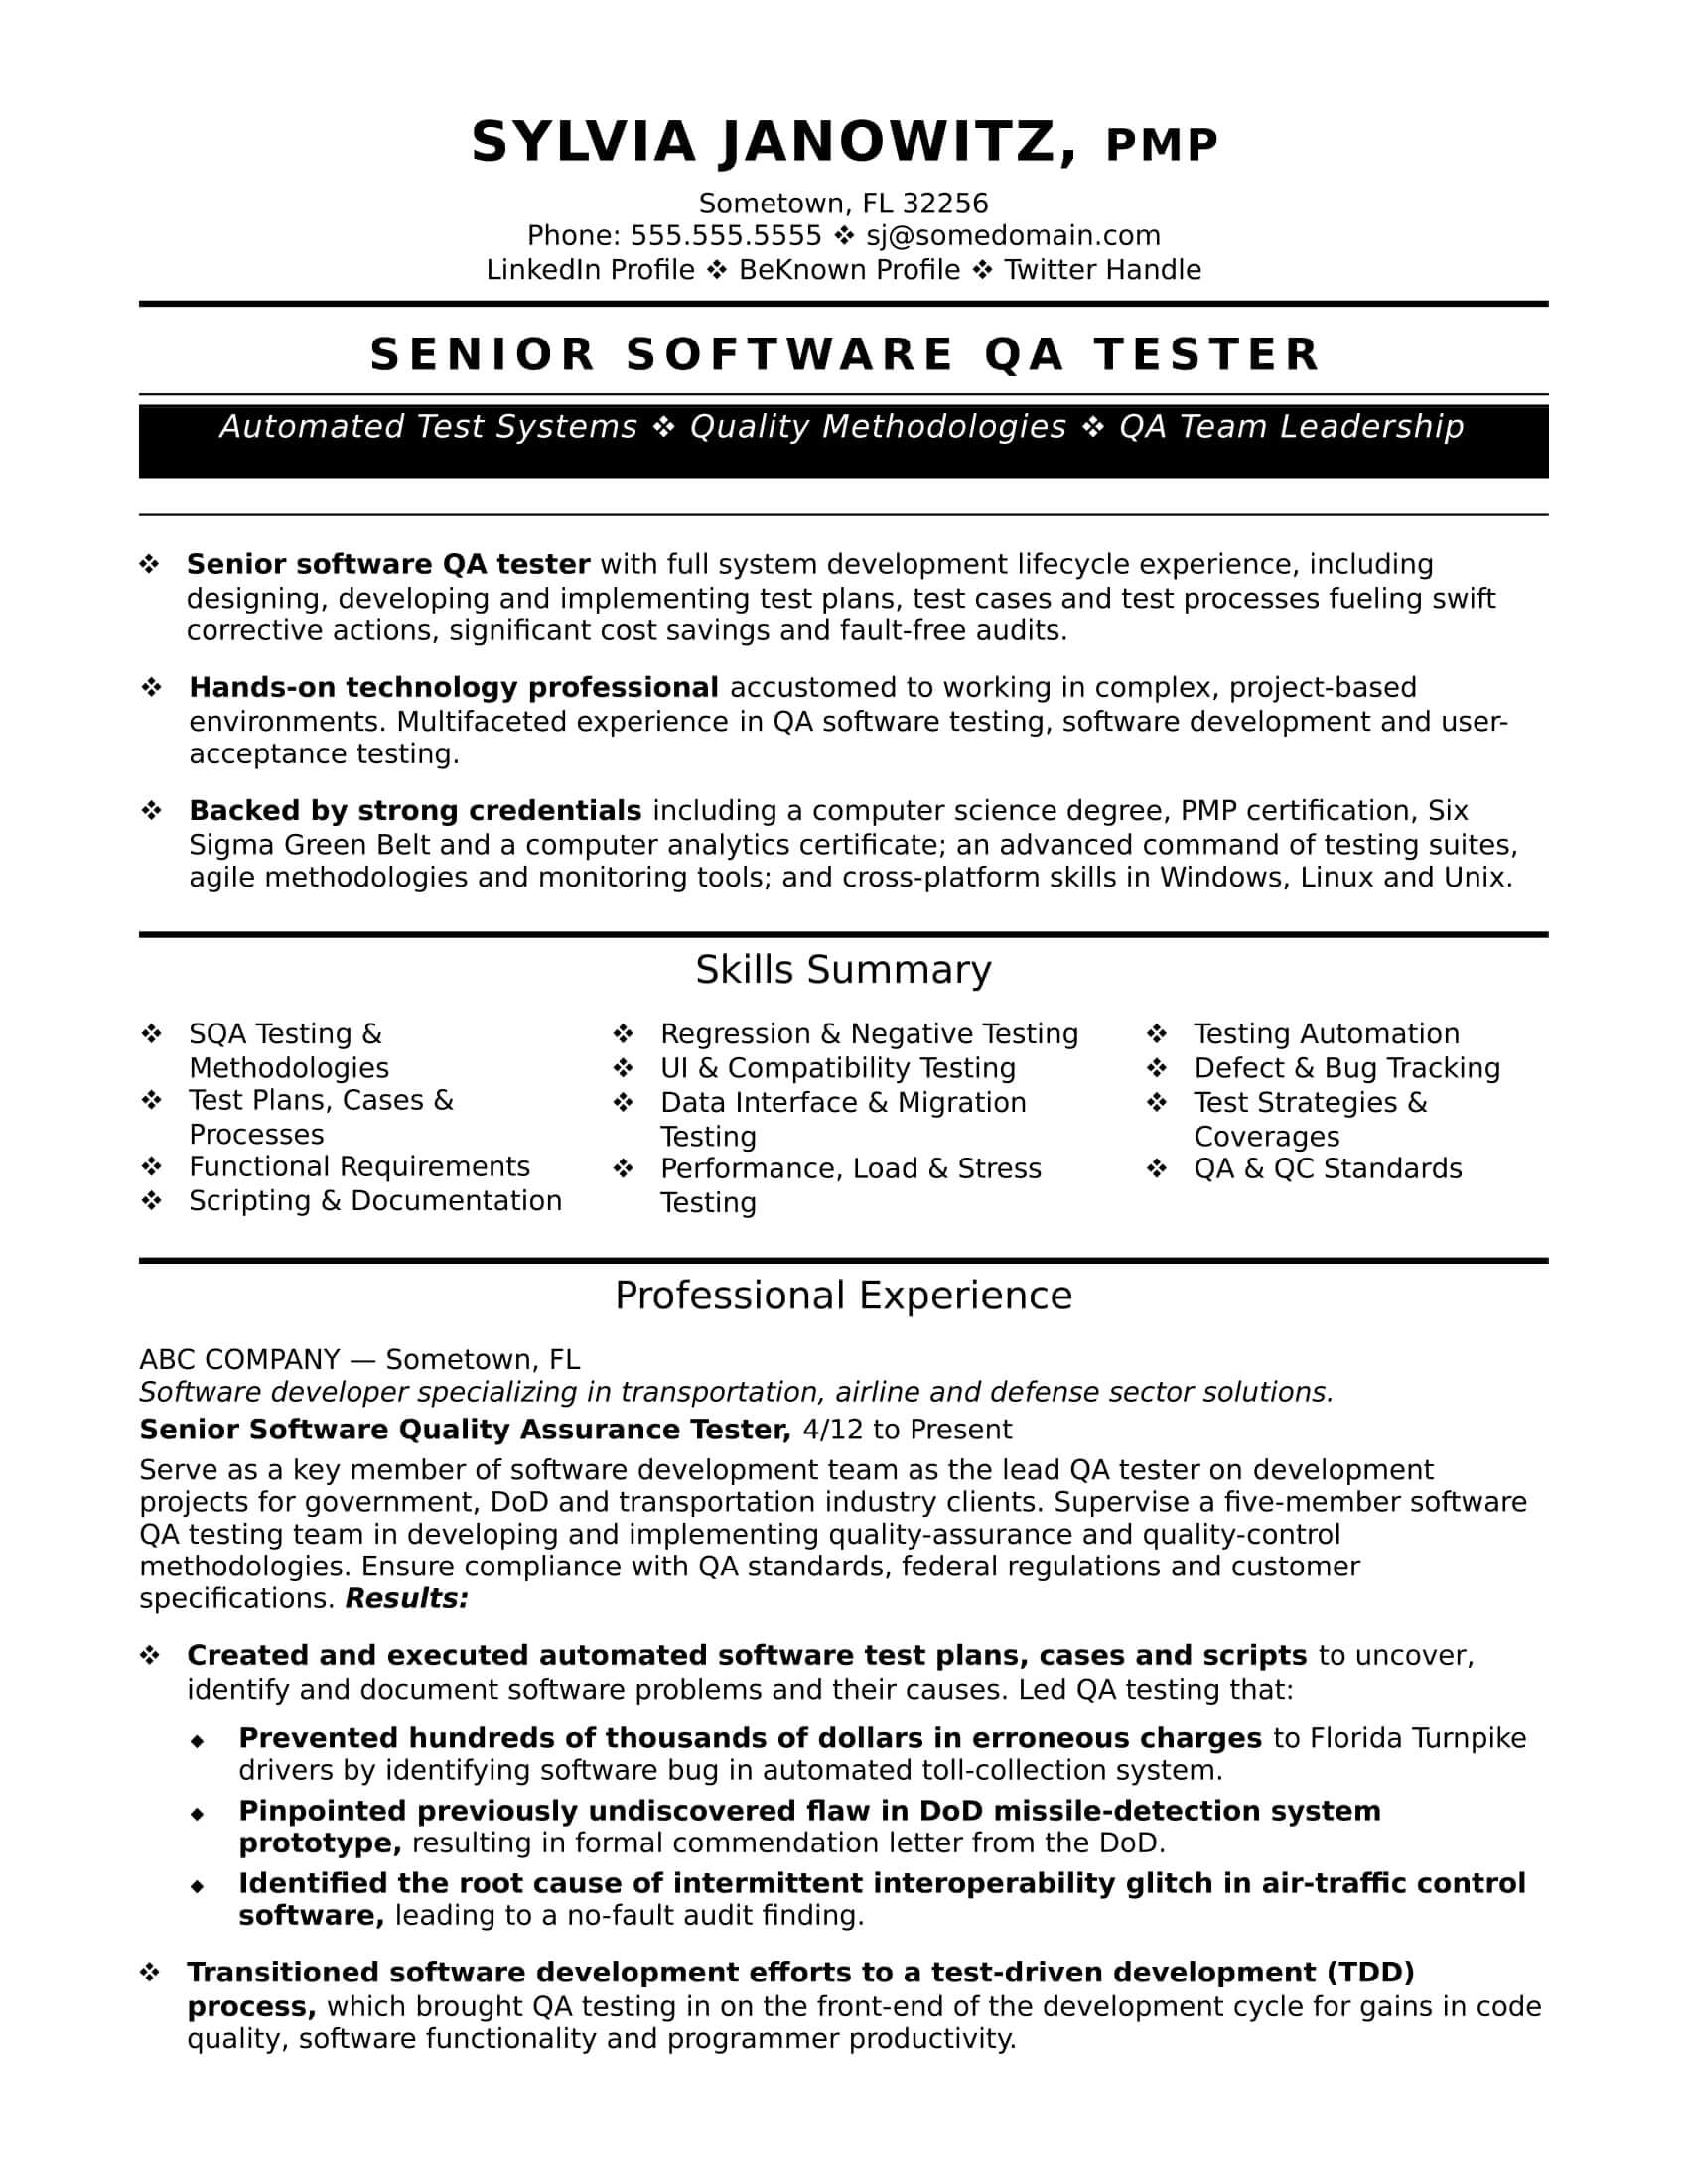 Experienced Qa Software Tester Resume Sample | Monster In Software Test Plan Template Word